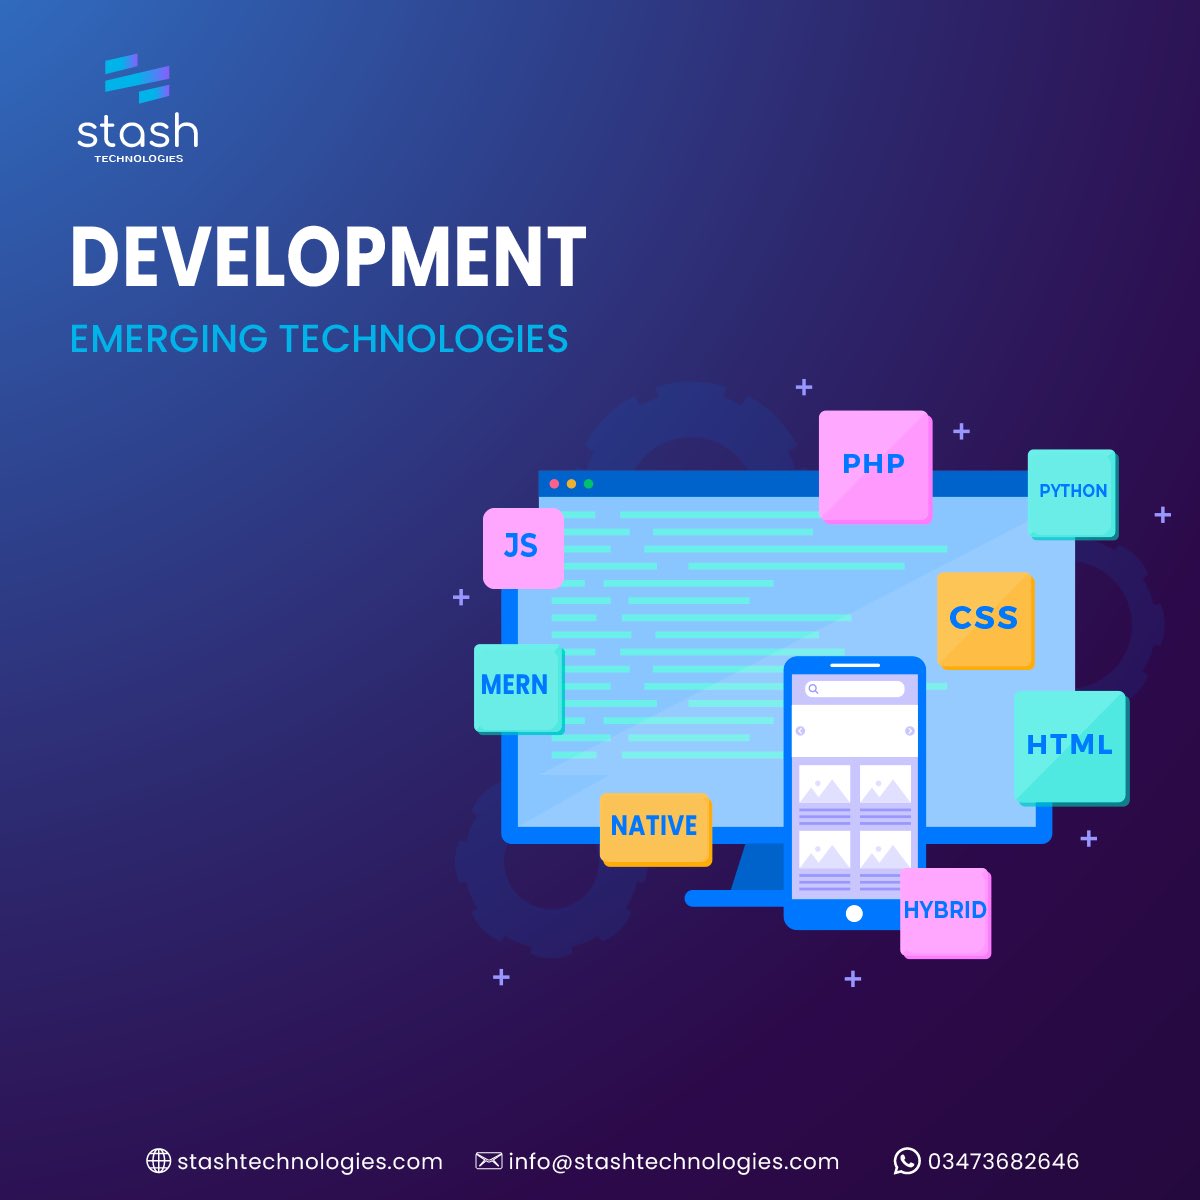 We specialize in custom software solutions using emerging technologies for complex business challenges.

#stashtechnologies #softwarehouse #techhouse #techcompany #technology #techtrends #itconsultancy #itservicescompany #digitalmarketing #webdevelopment #appdevelopment